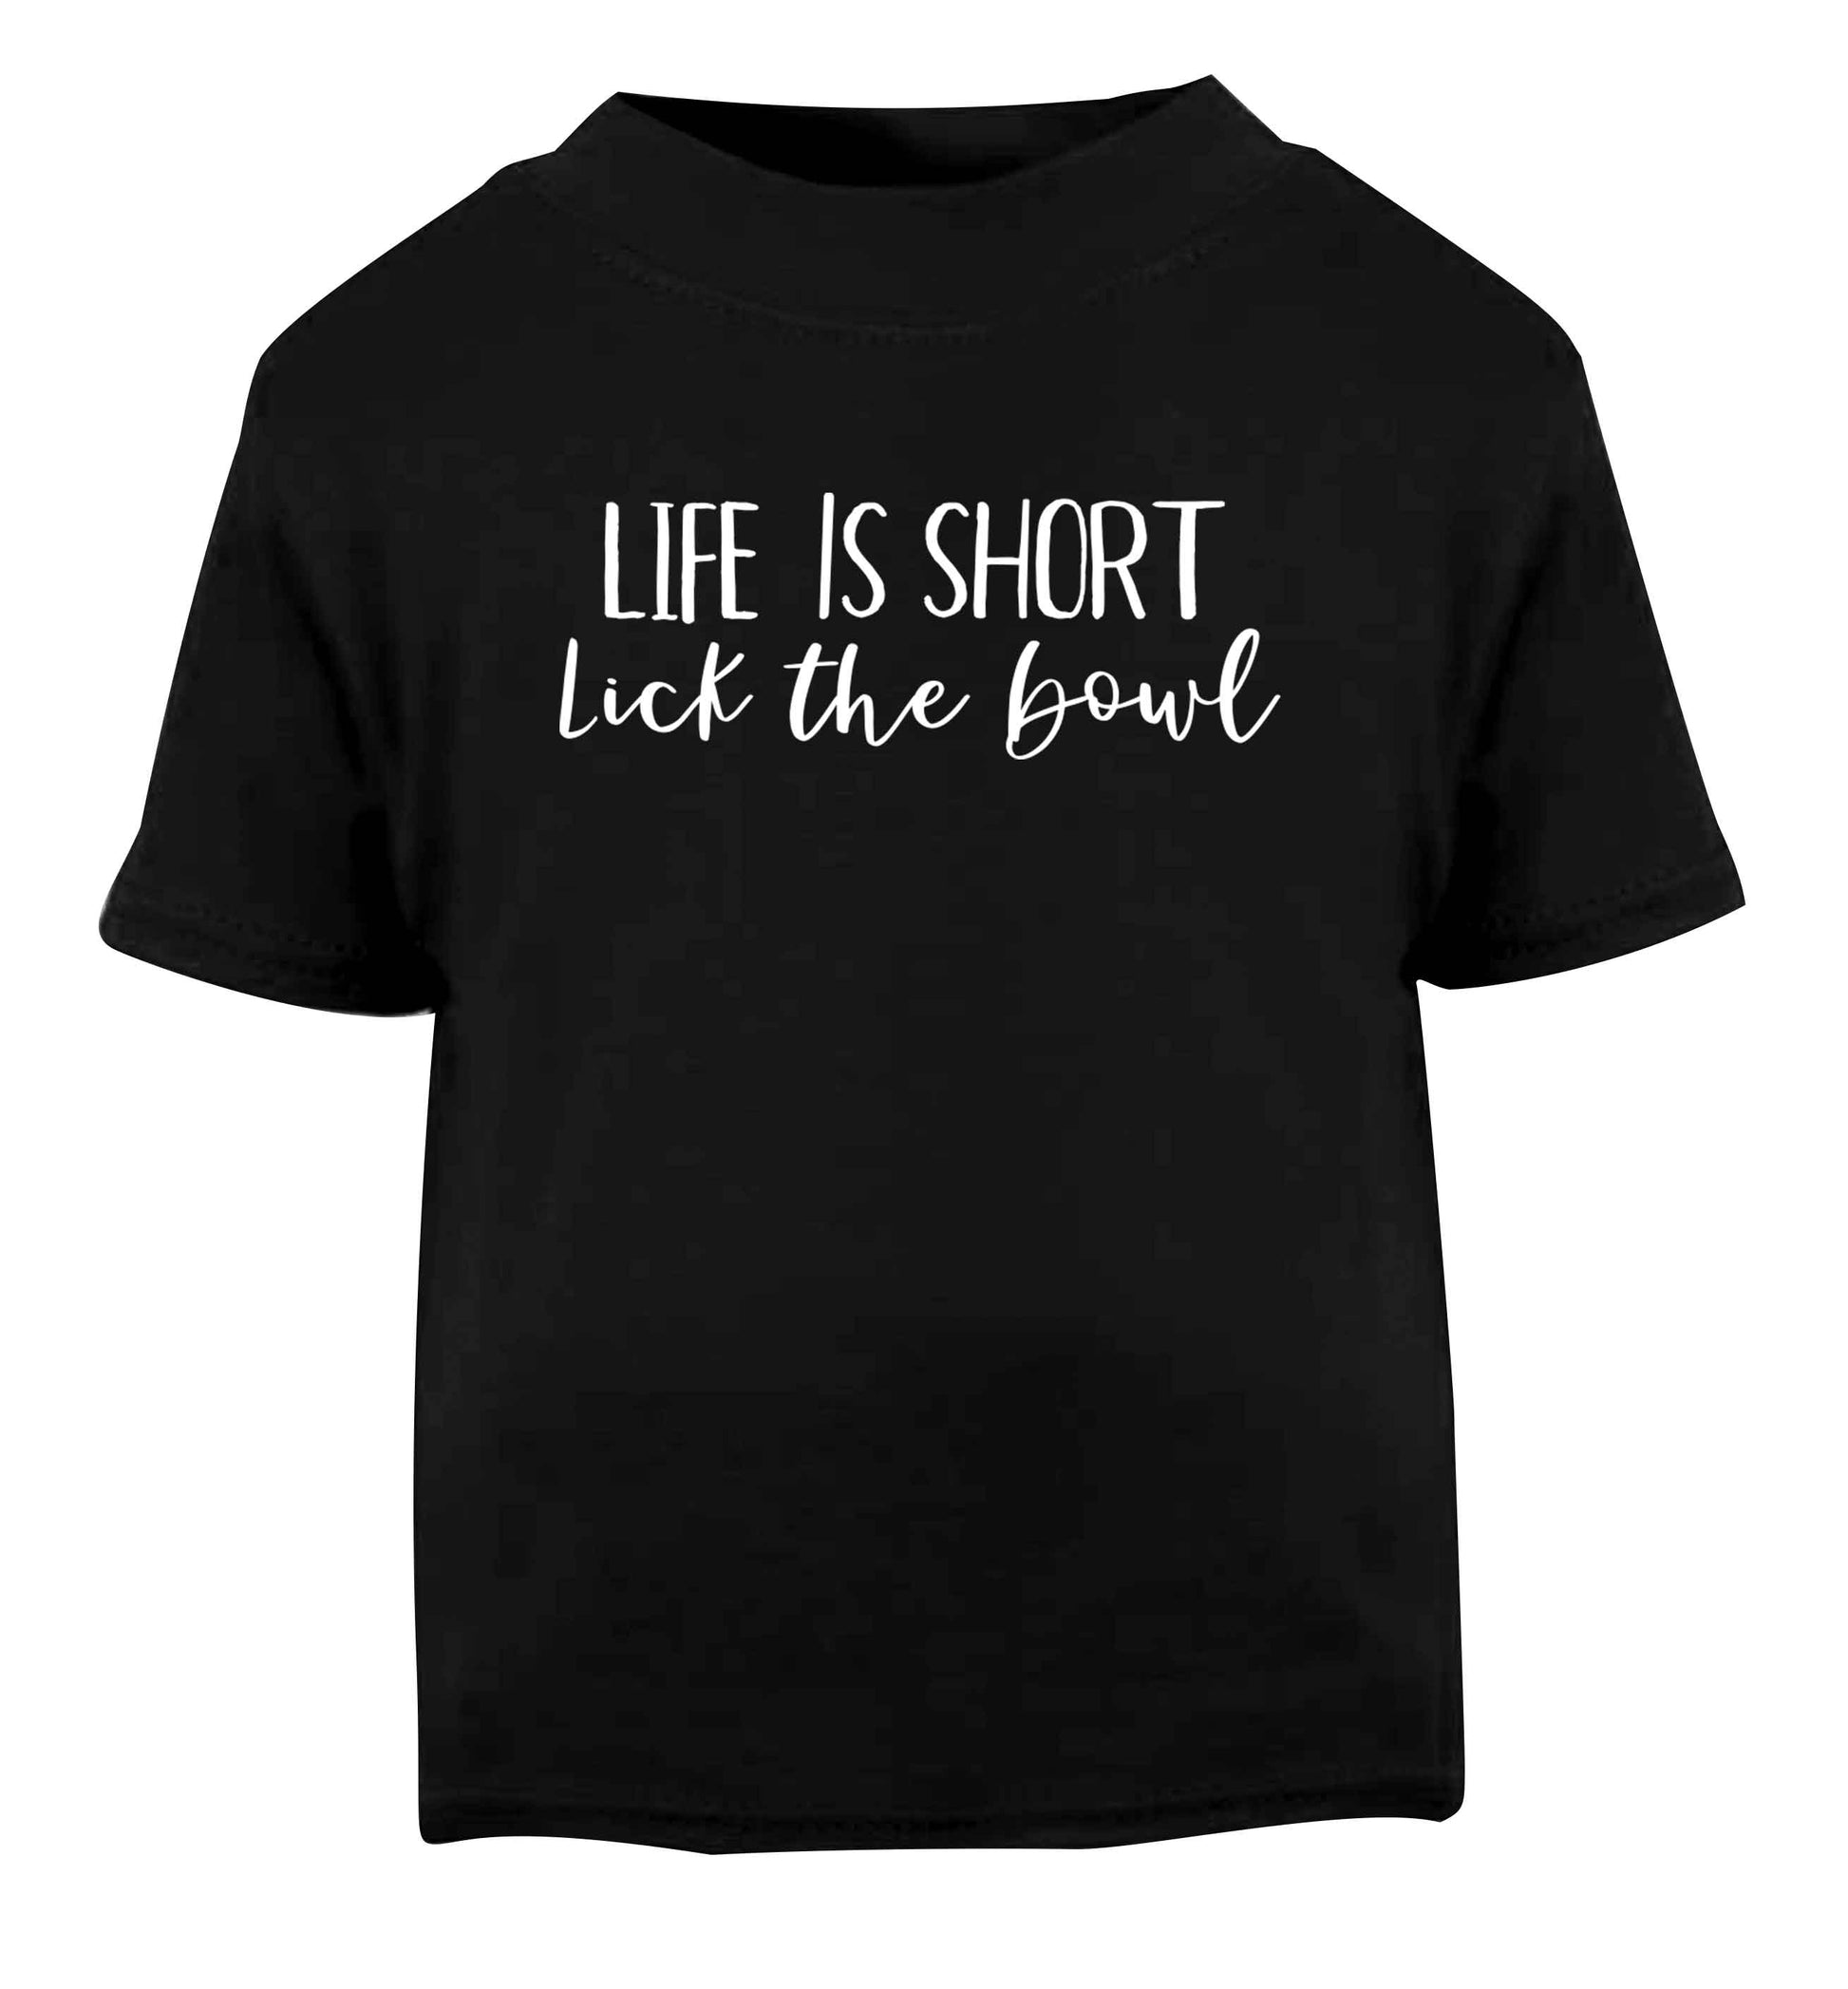 Life is short lick the bowl Black Baby Toddler Tshirt 2 years